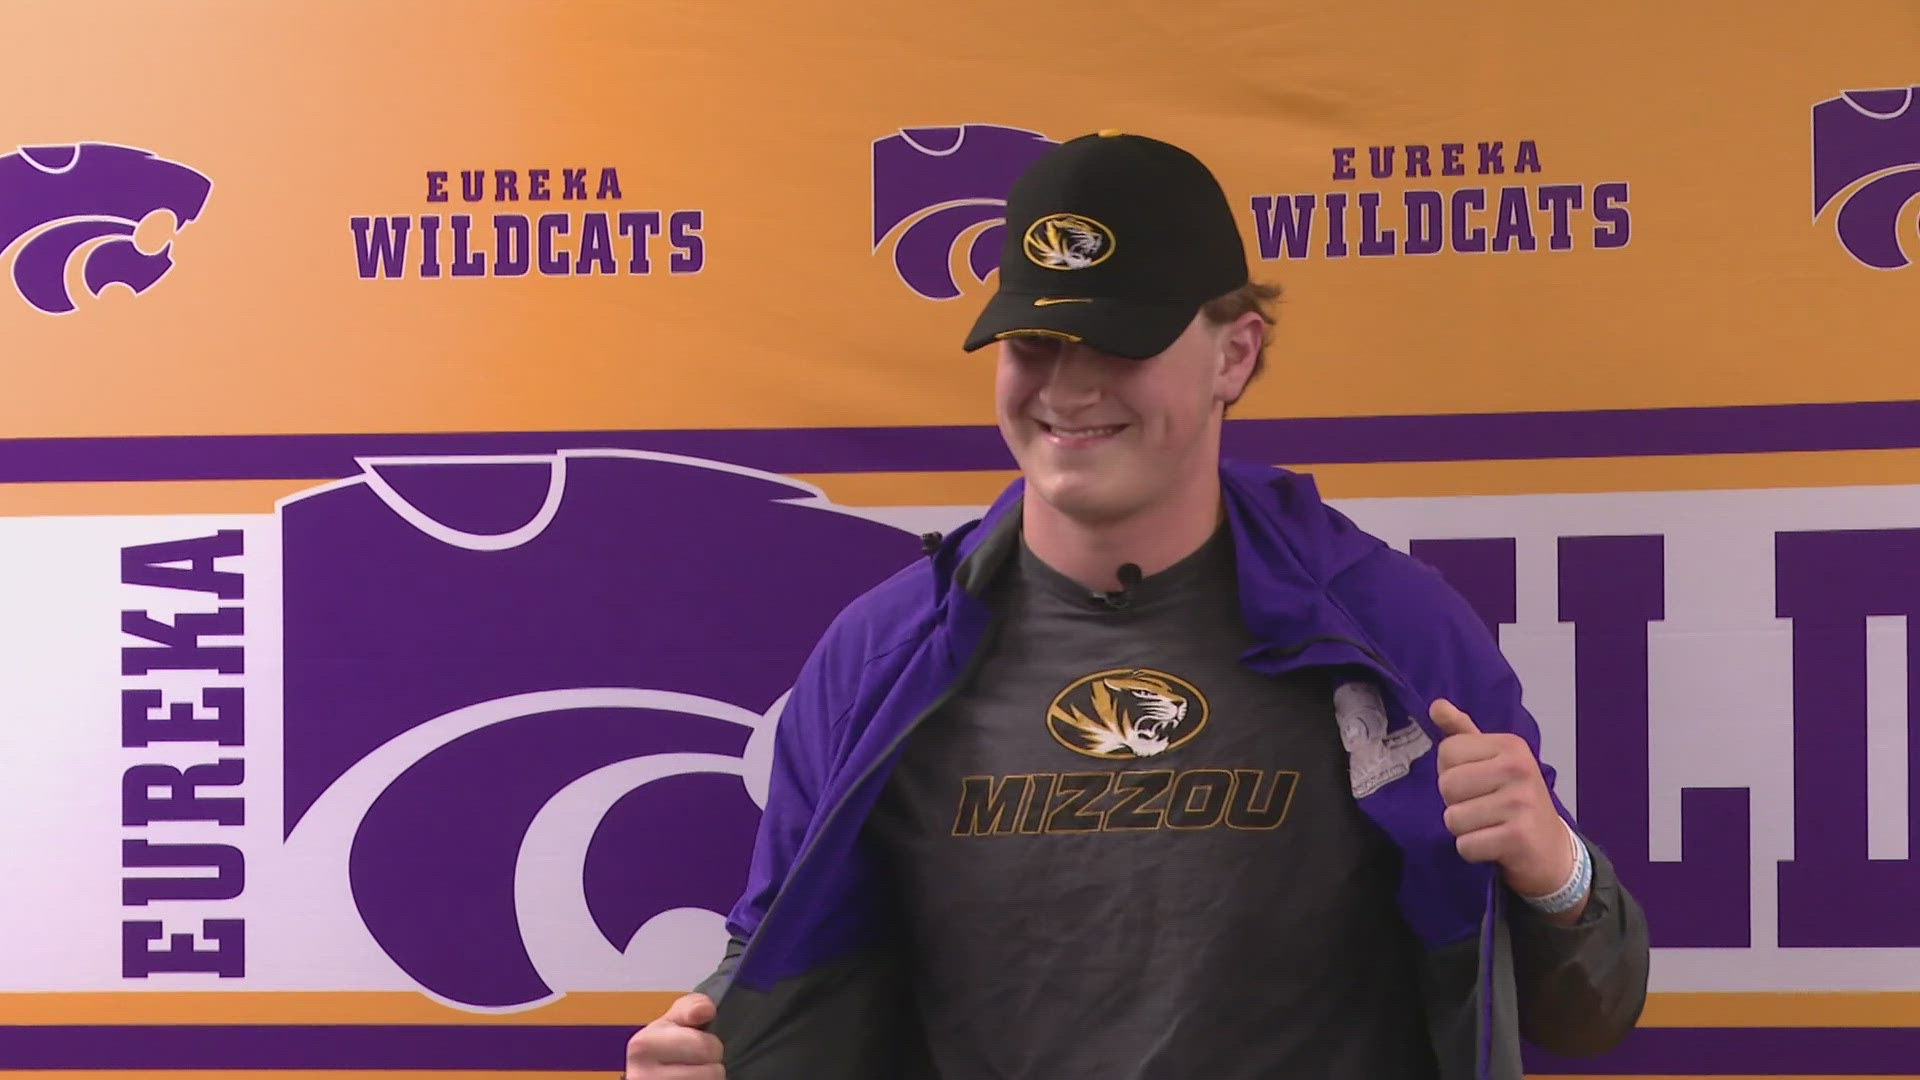 Four-star recruit Jack Lange committed to Mizzou on Thursday. He is a 6-foot-8, 275-pound offensive tackle.